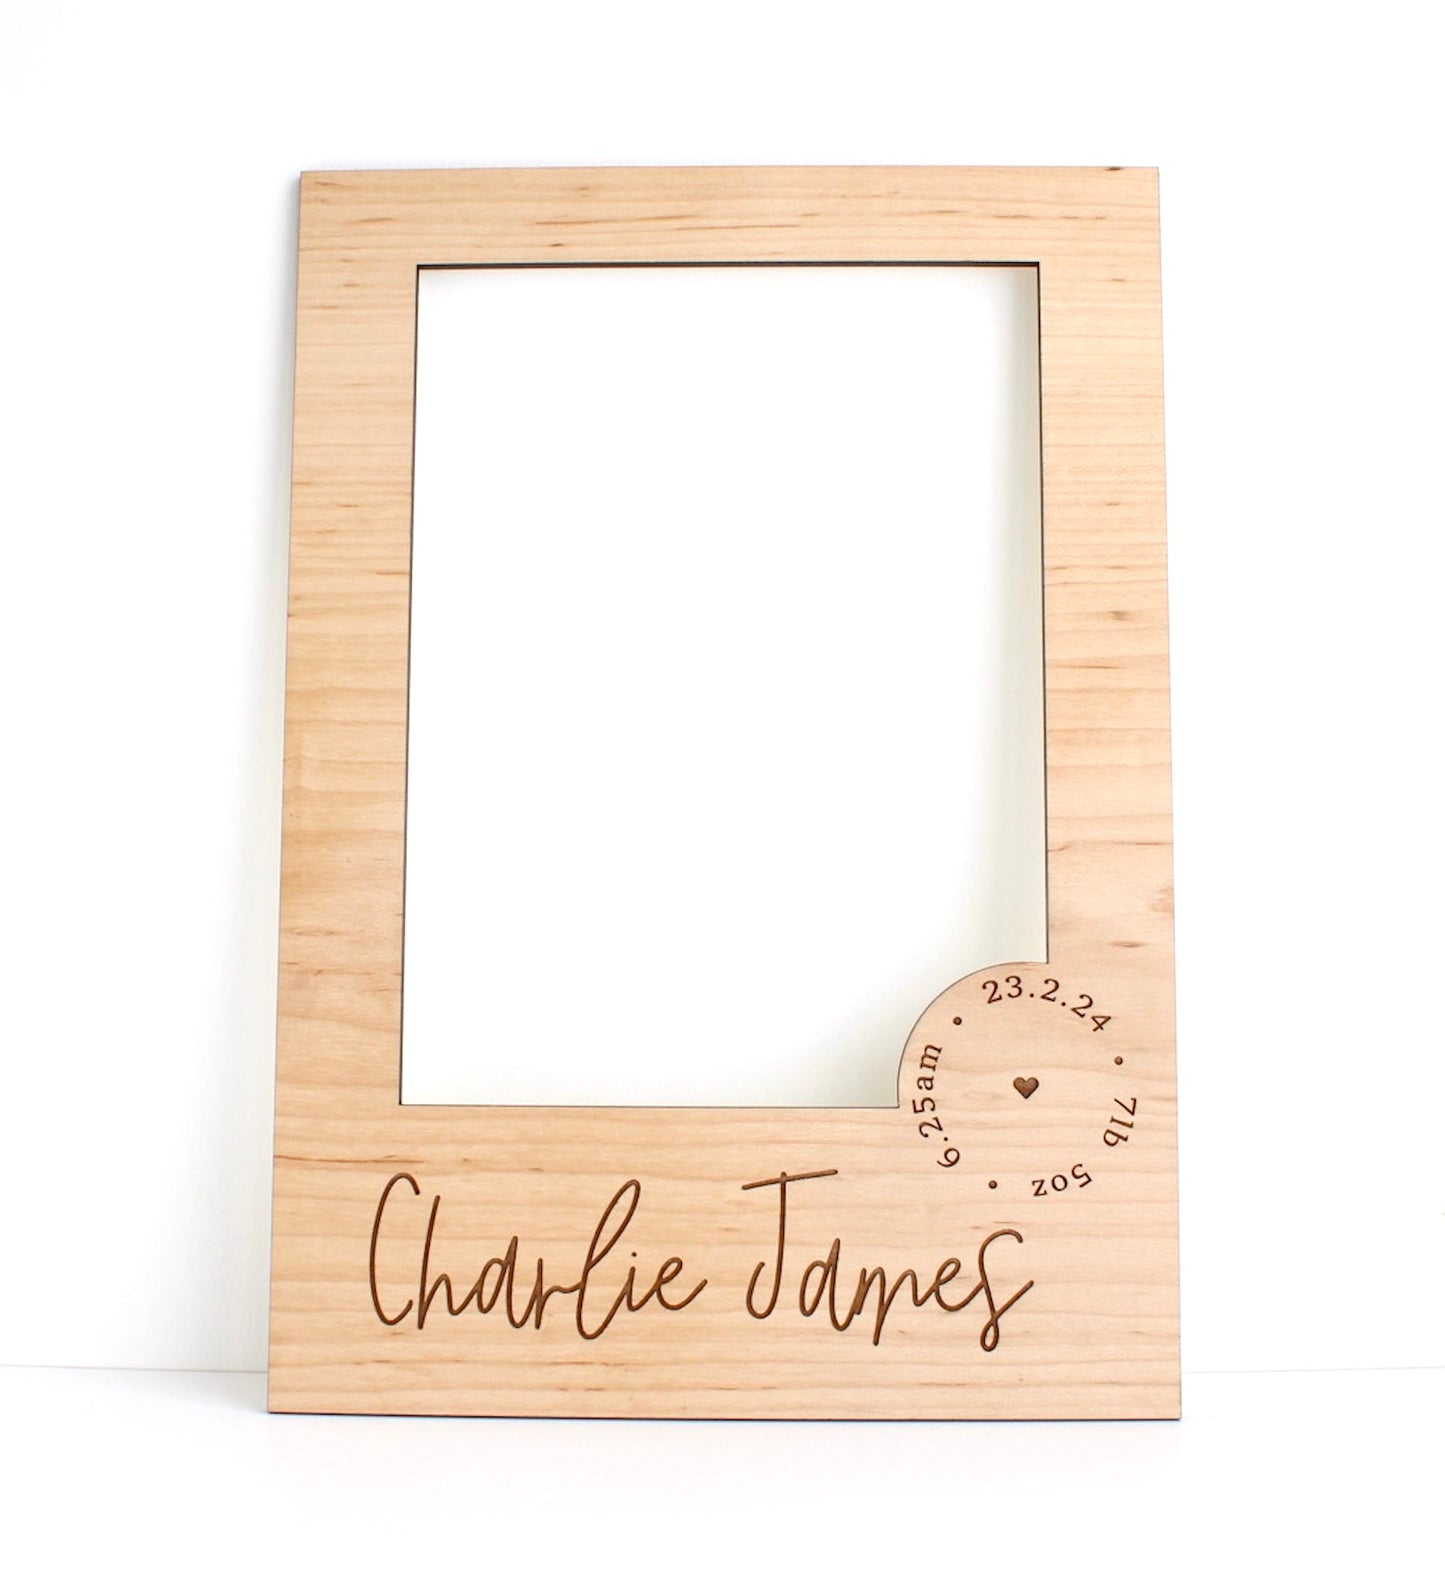 Personalised wooden picture mount for a new baby photo frame